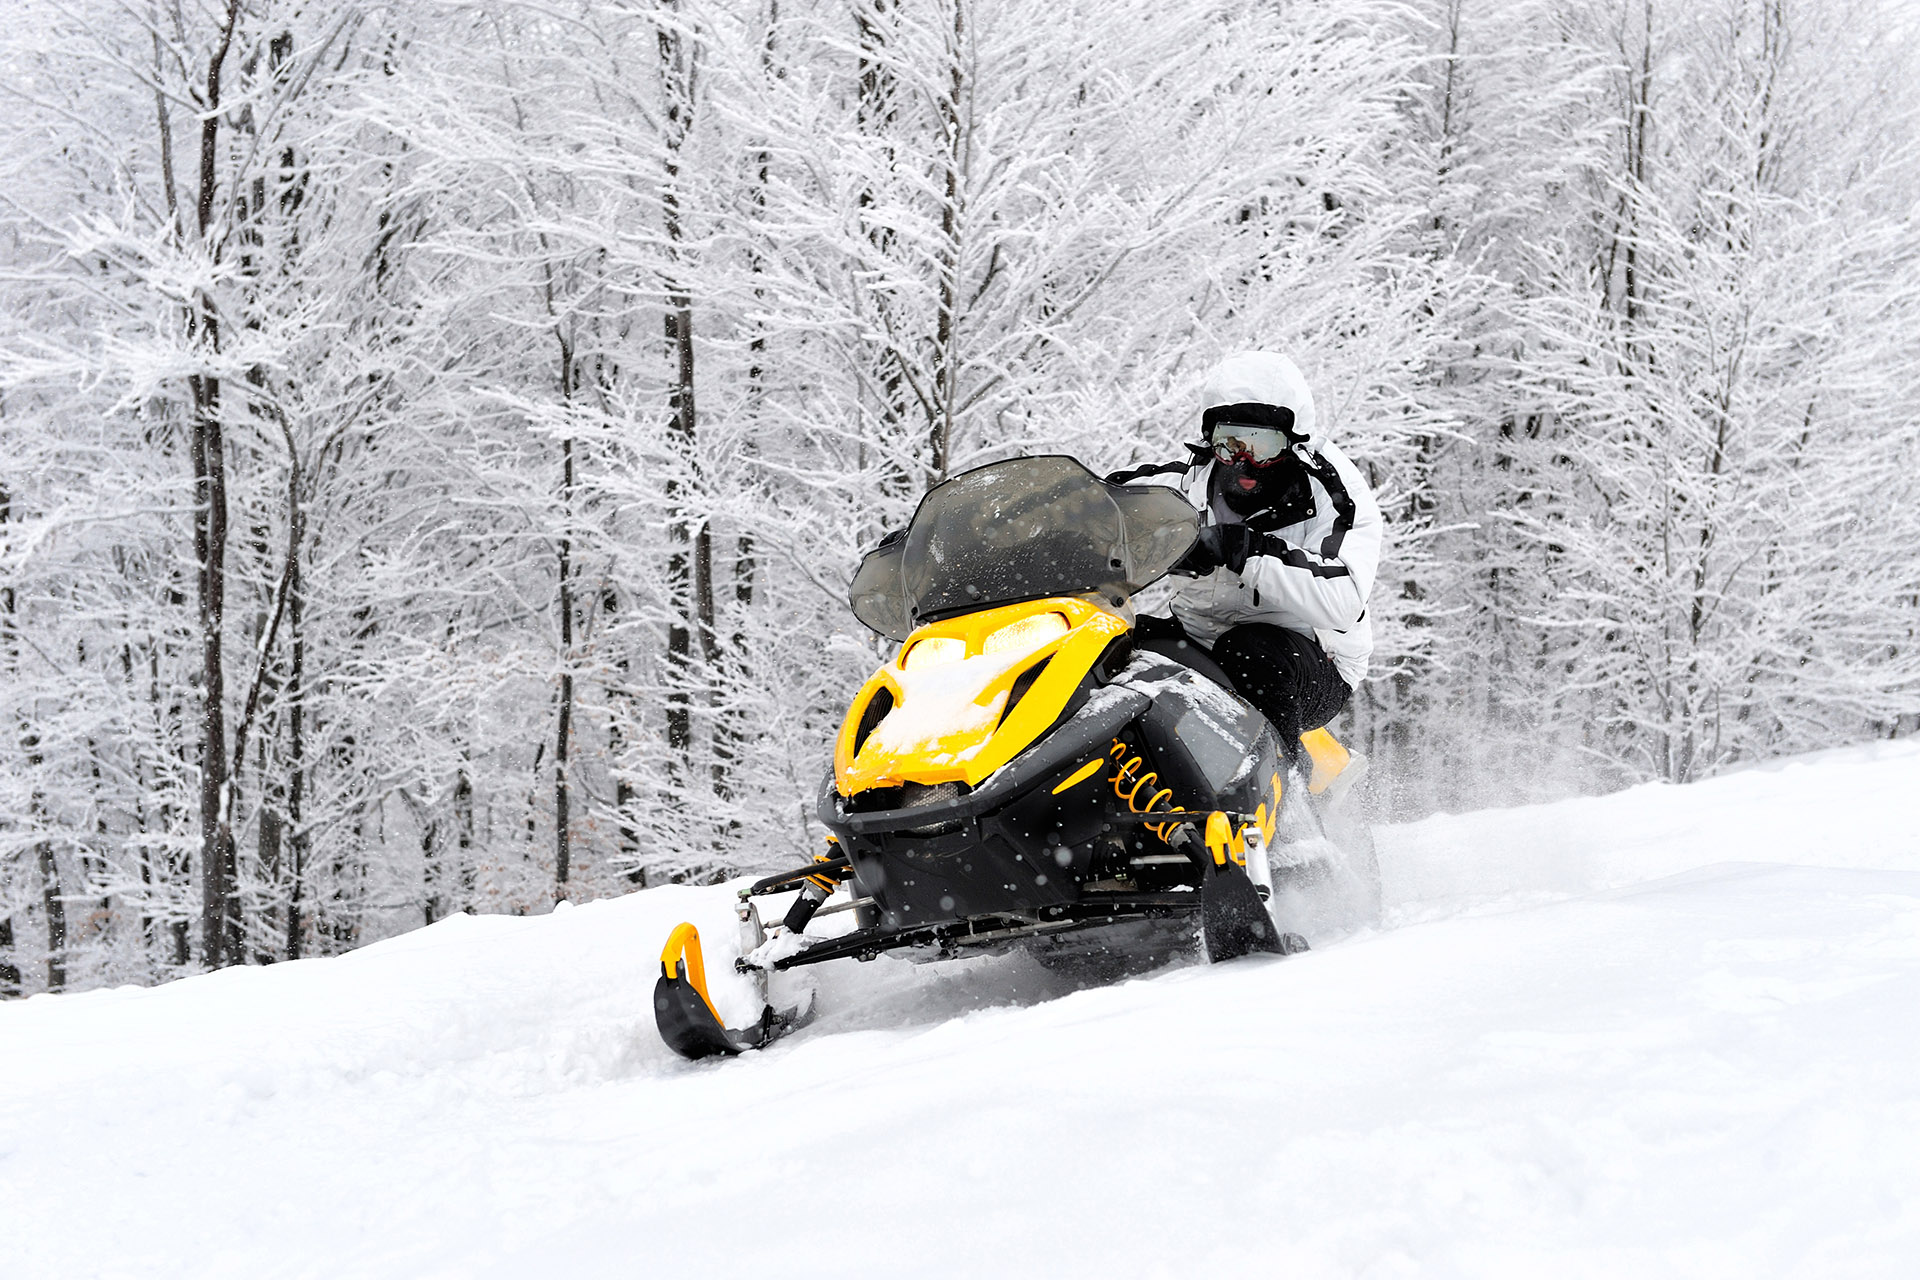 Yellow Snowmobile on Fresh Snow With Snow Covered Trees In Background